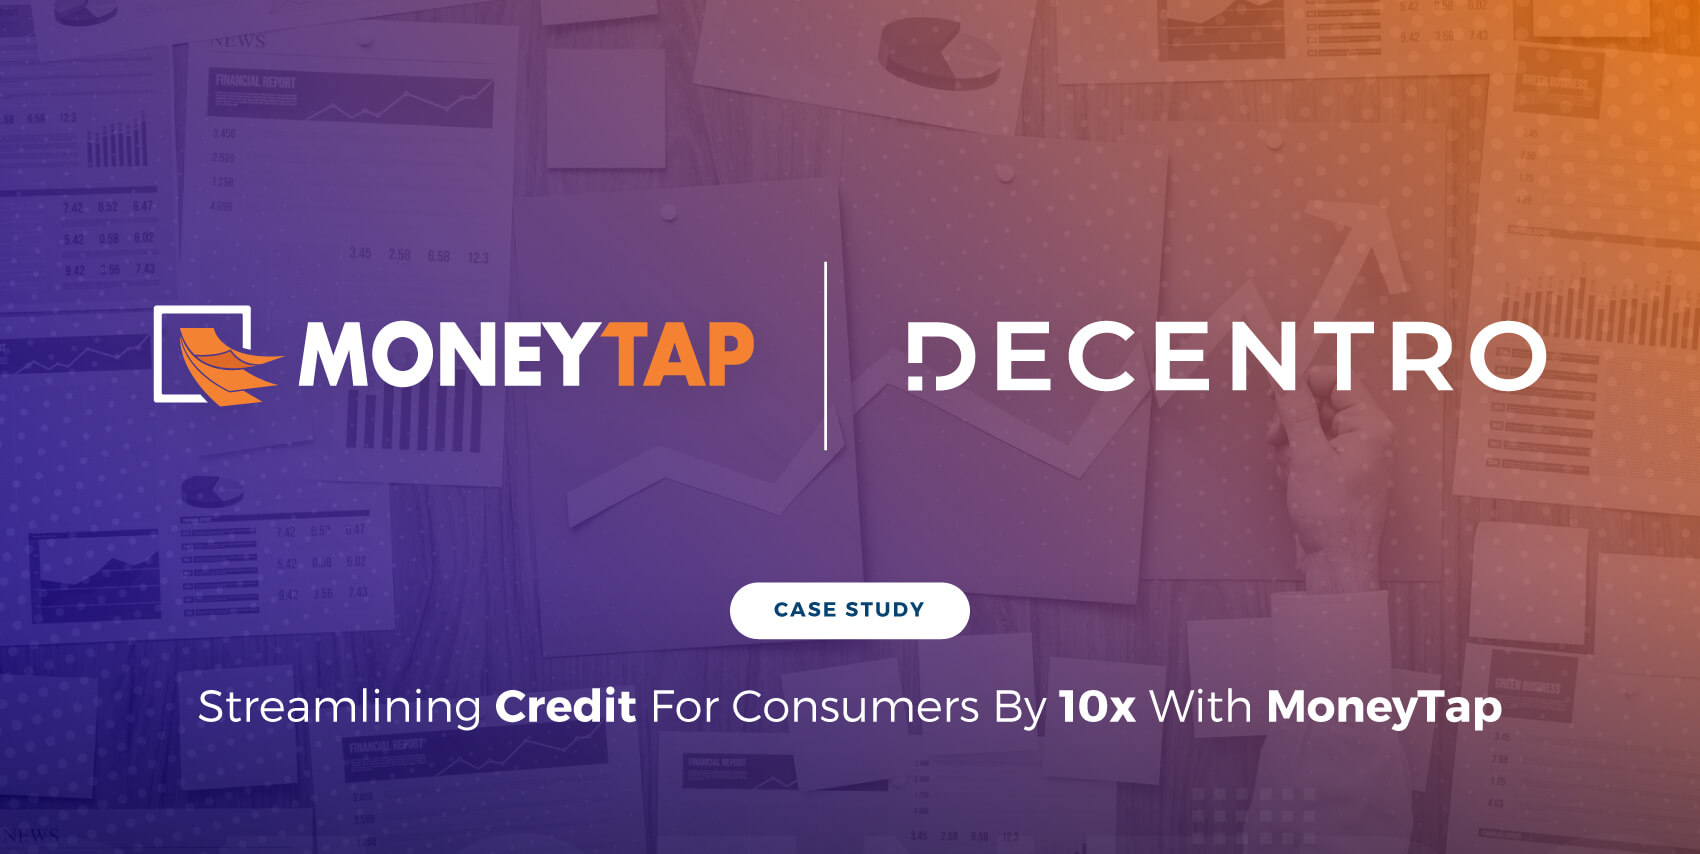 A case study on how MoneyTap streamlined consumer lending with Decentro